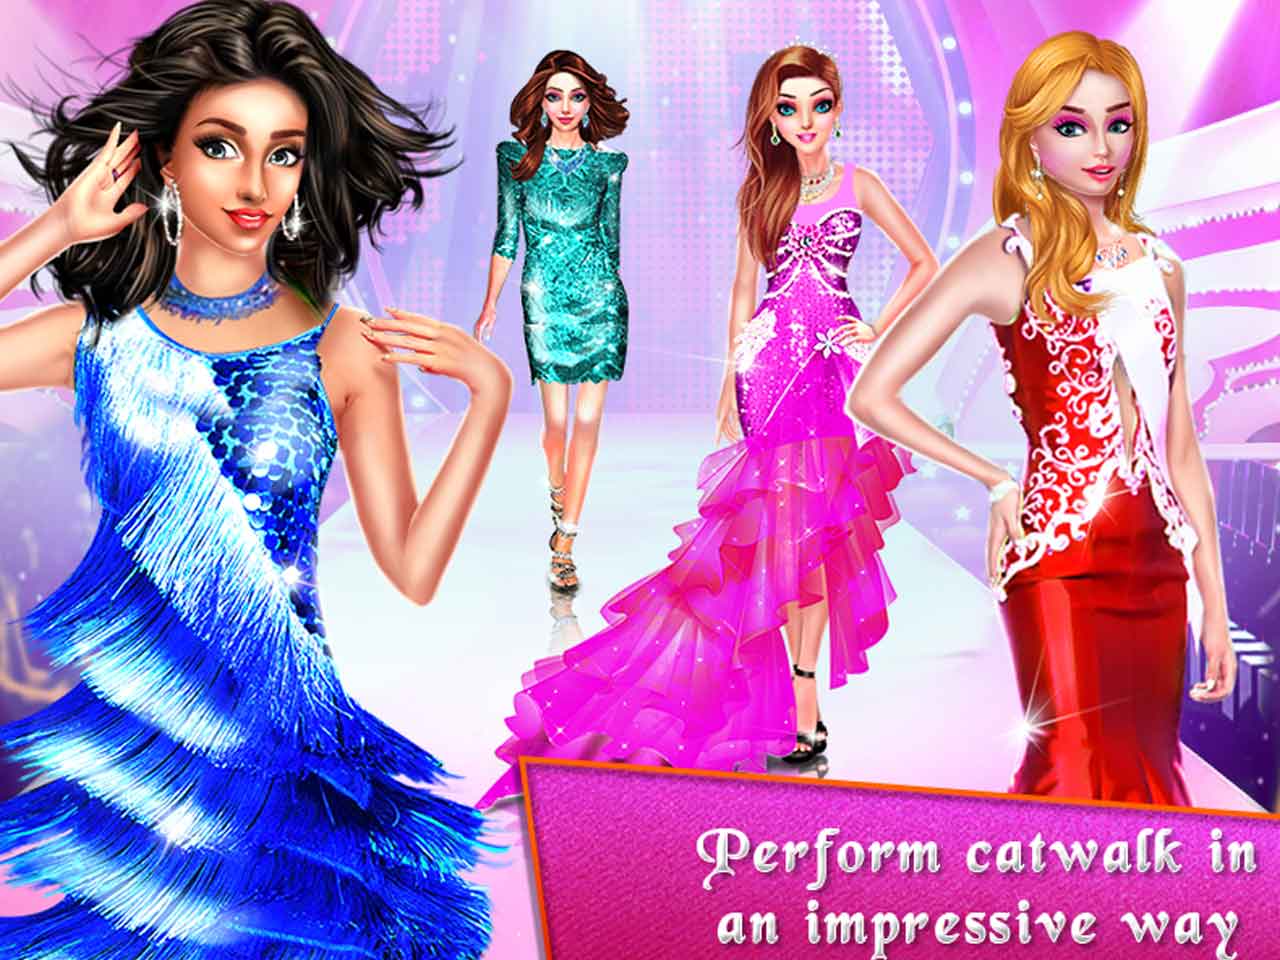 20 Game Fashion Show Terbaik Di Android Offline Online